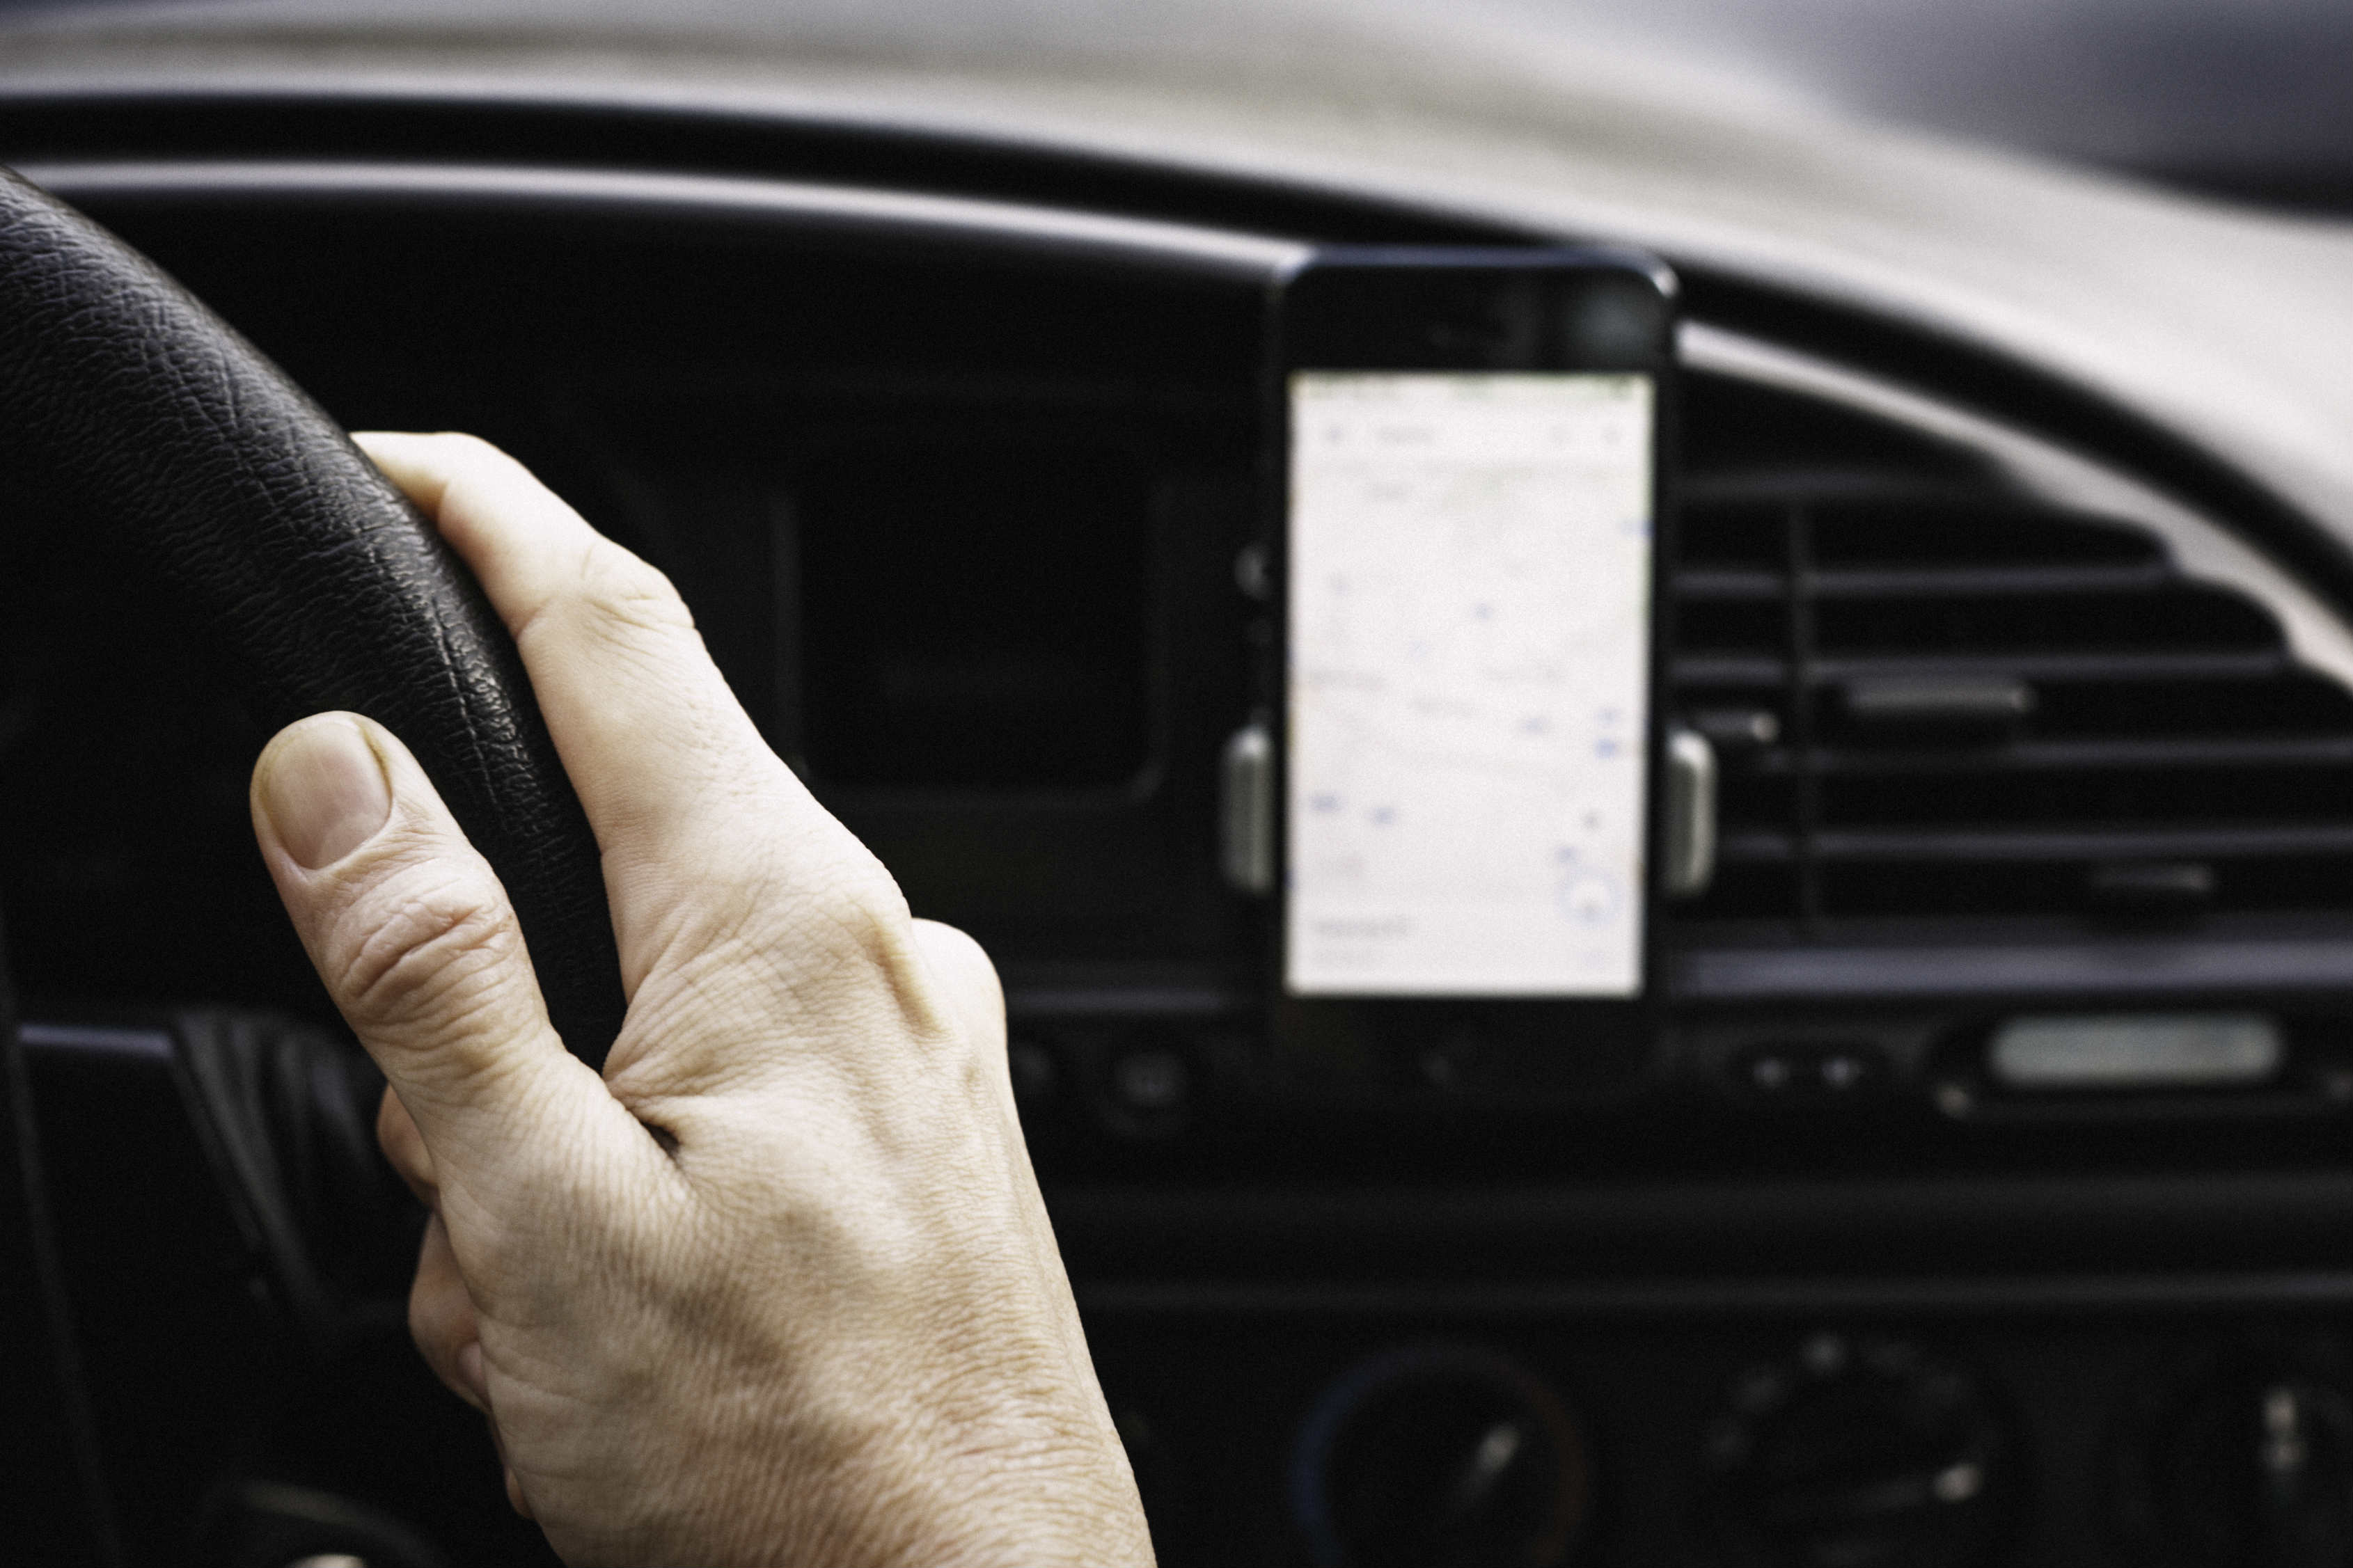 Phone holders how to remain legal in a car when using sat nav or making calls